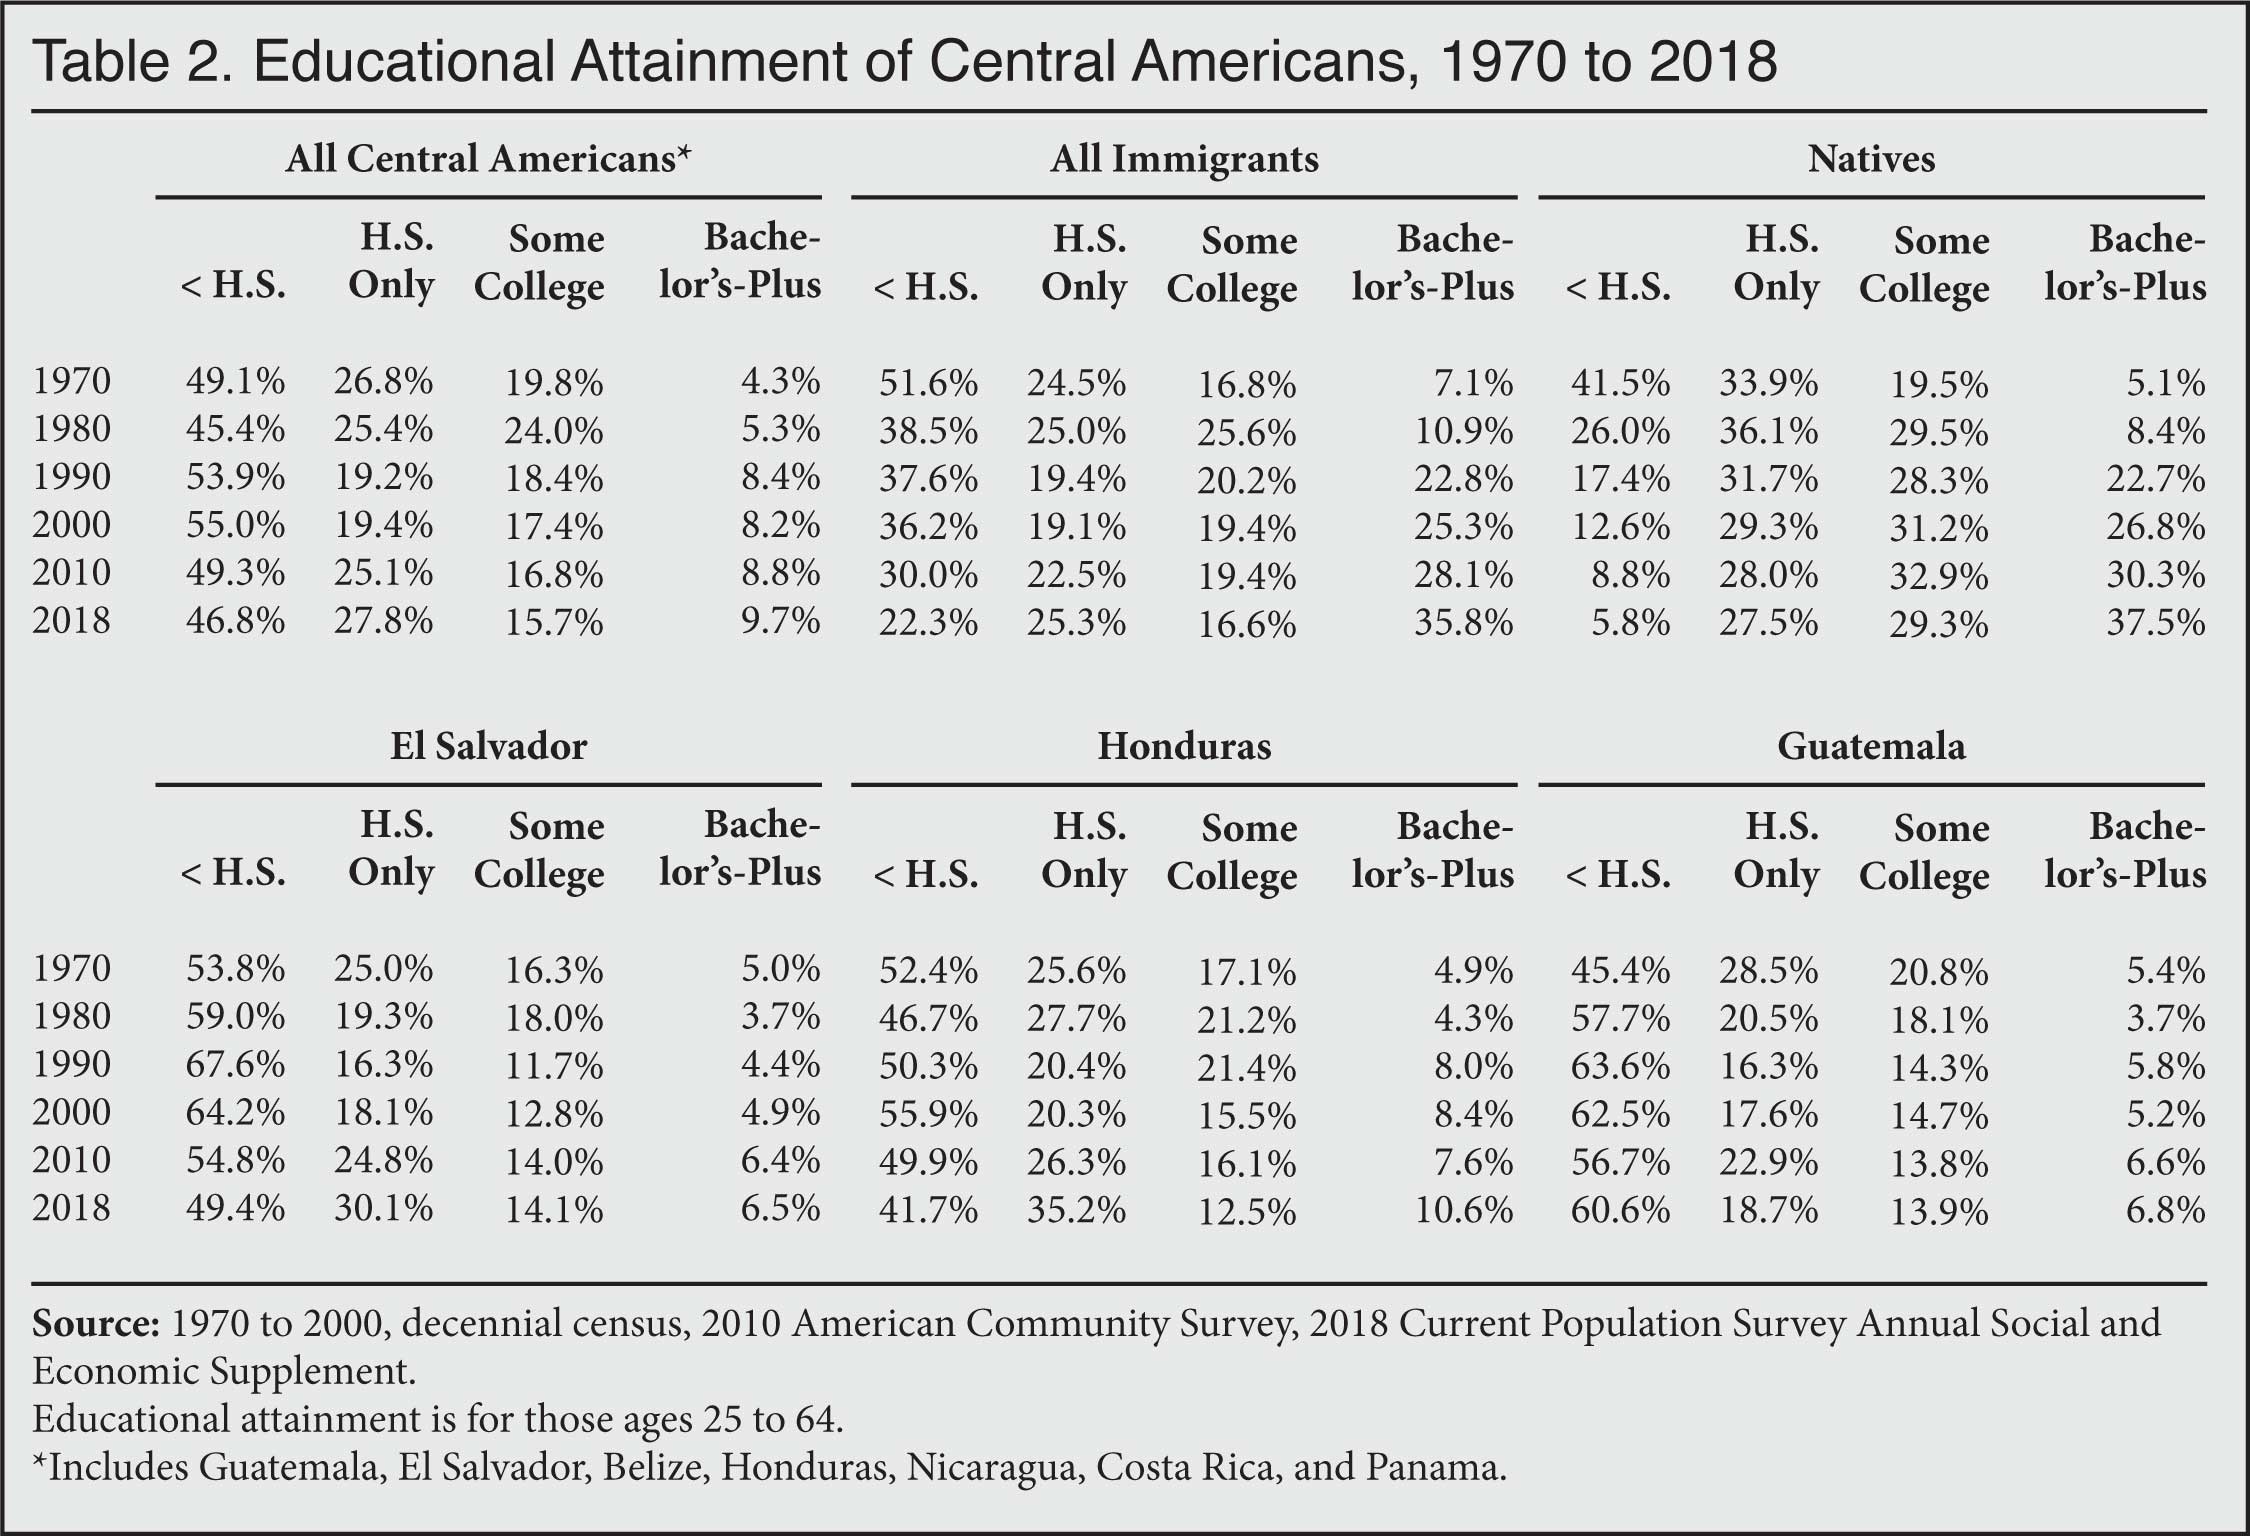 Table: Educational Attainment of Central Americans, 1970 to 2018